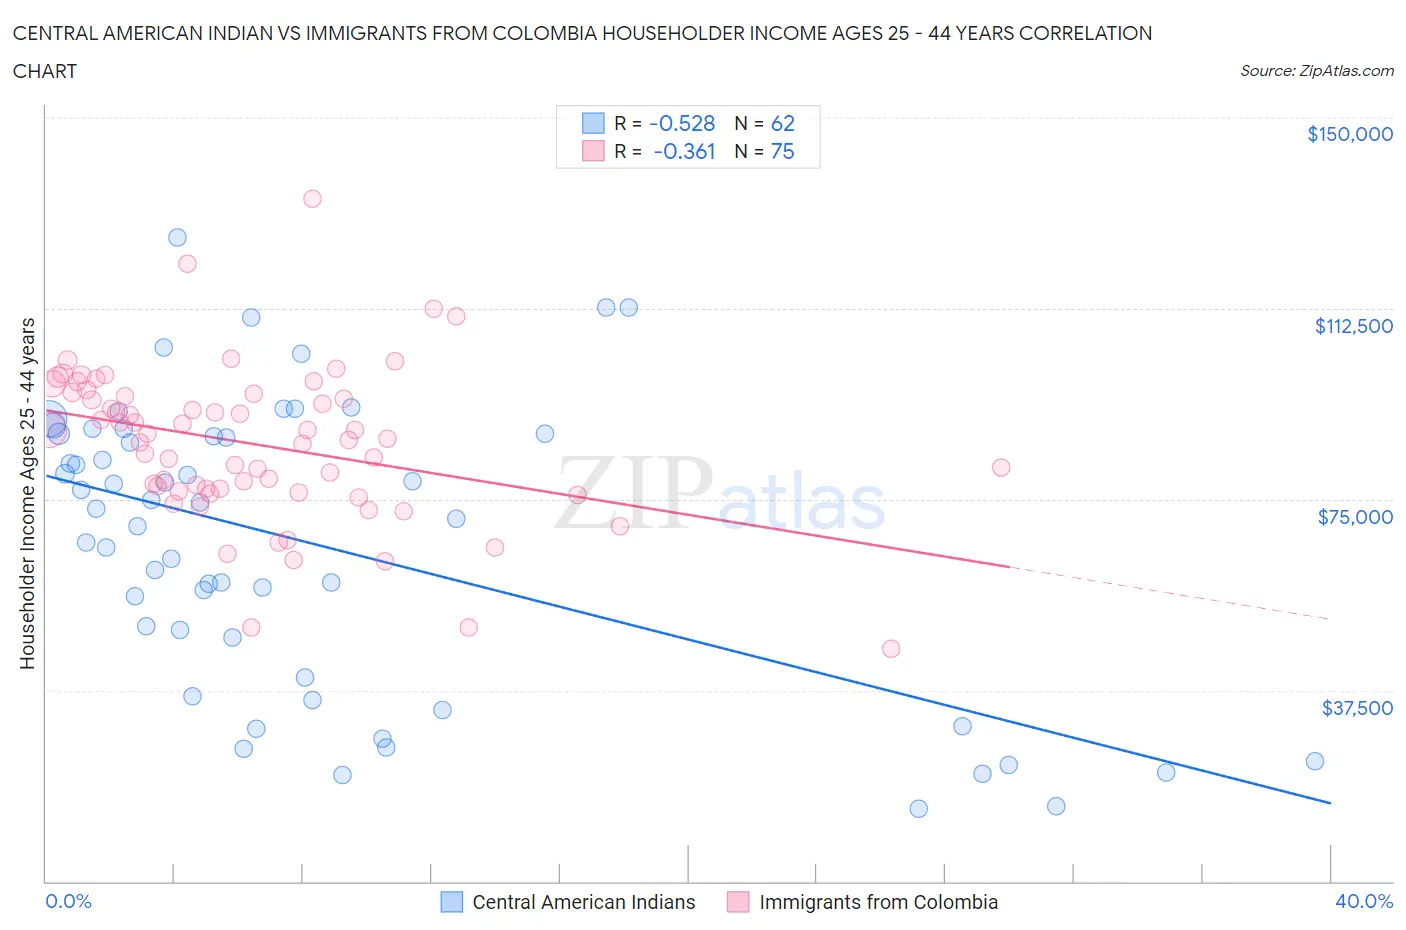 Central American Indian vs Immigrants from Colombia Householder Income Ages 25 - 44 years